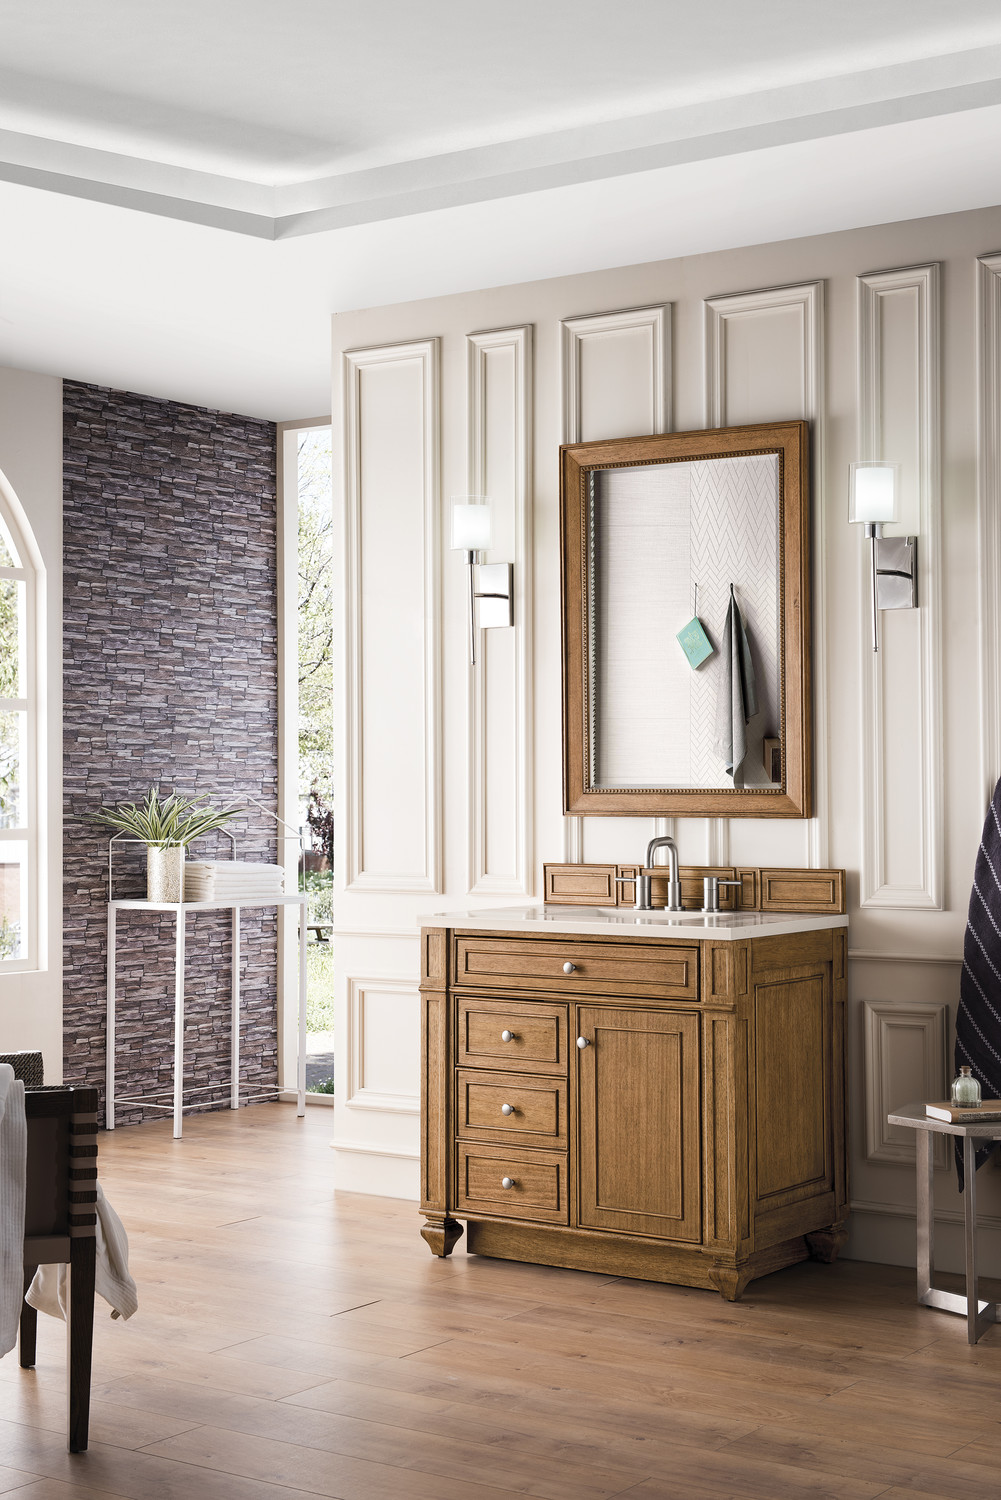 double bathroom vanity with storage tower James Martin Vanity Saddle Brown Transitional